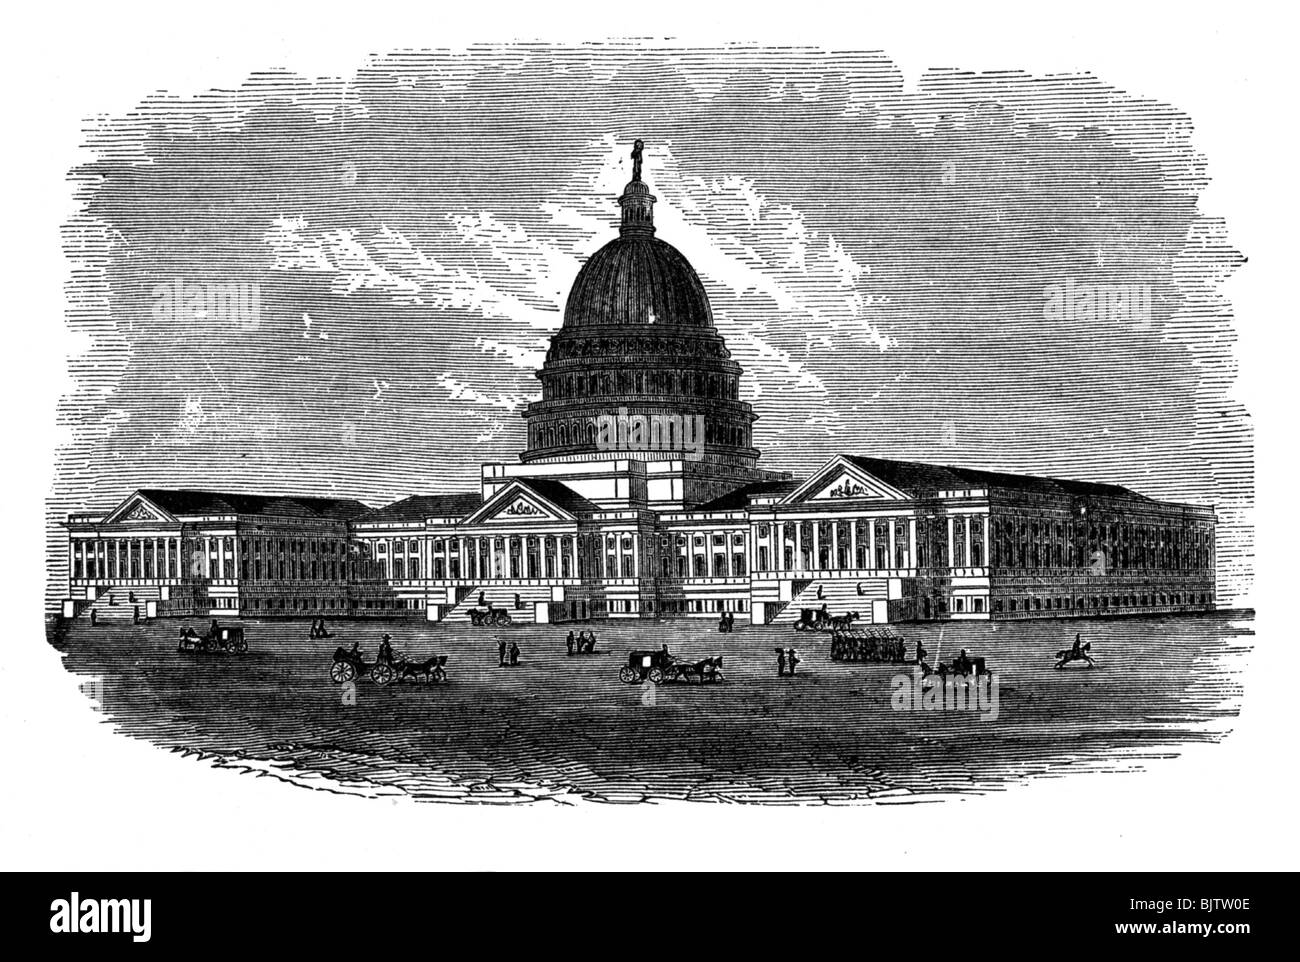 geography / travel, United States of America, Washington D.C., Capitol, wood engraving, 19th century, historic, historical, capital, exterior view, parliamental building, capitol, statehouse, statehouses, building, buildings, architecture, North America, people, Stock Photo